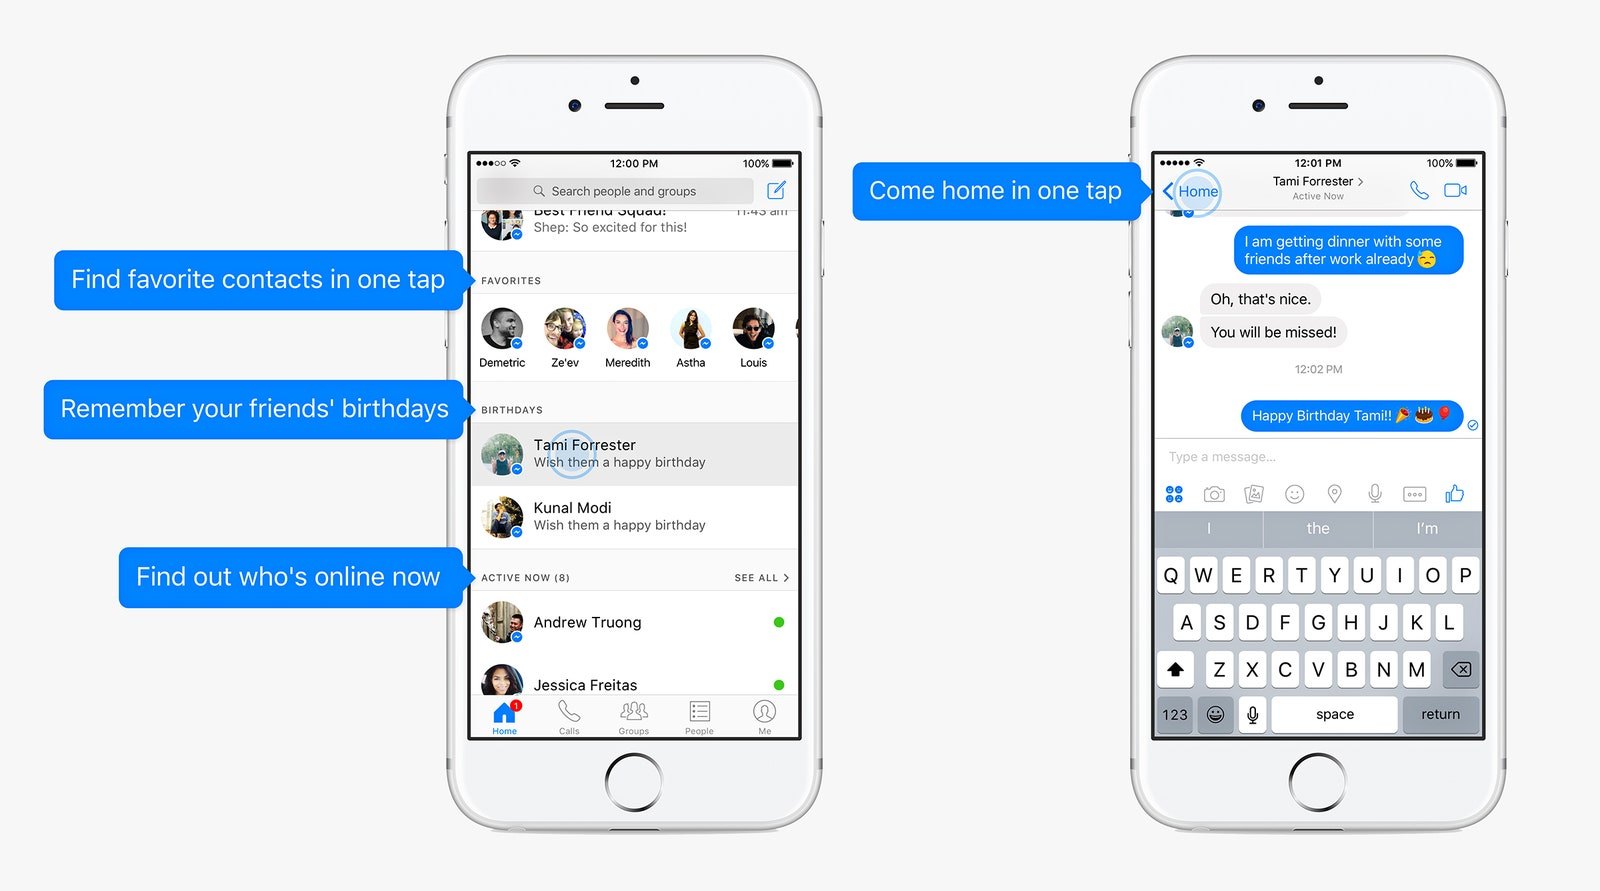 Discover How To Send Quick Messages With The Facebook Messenger App